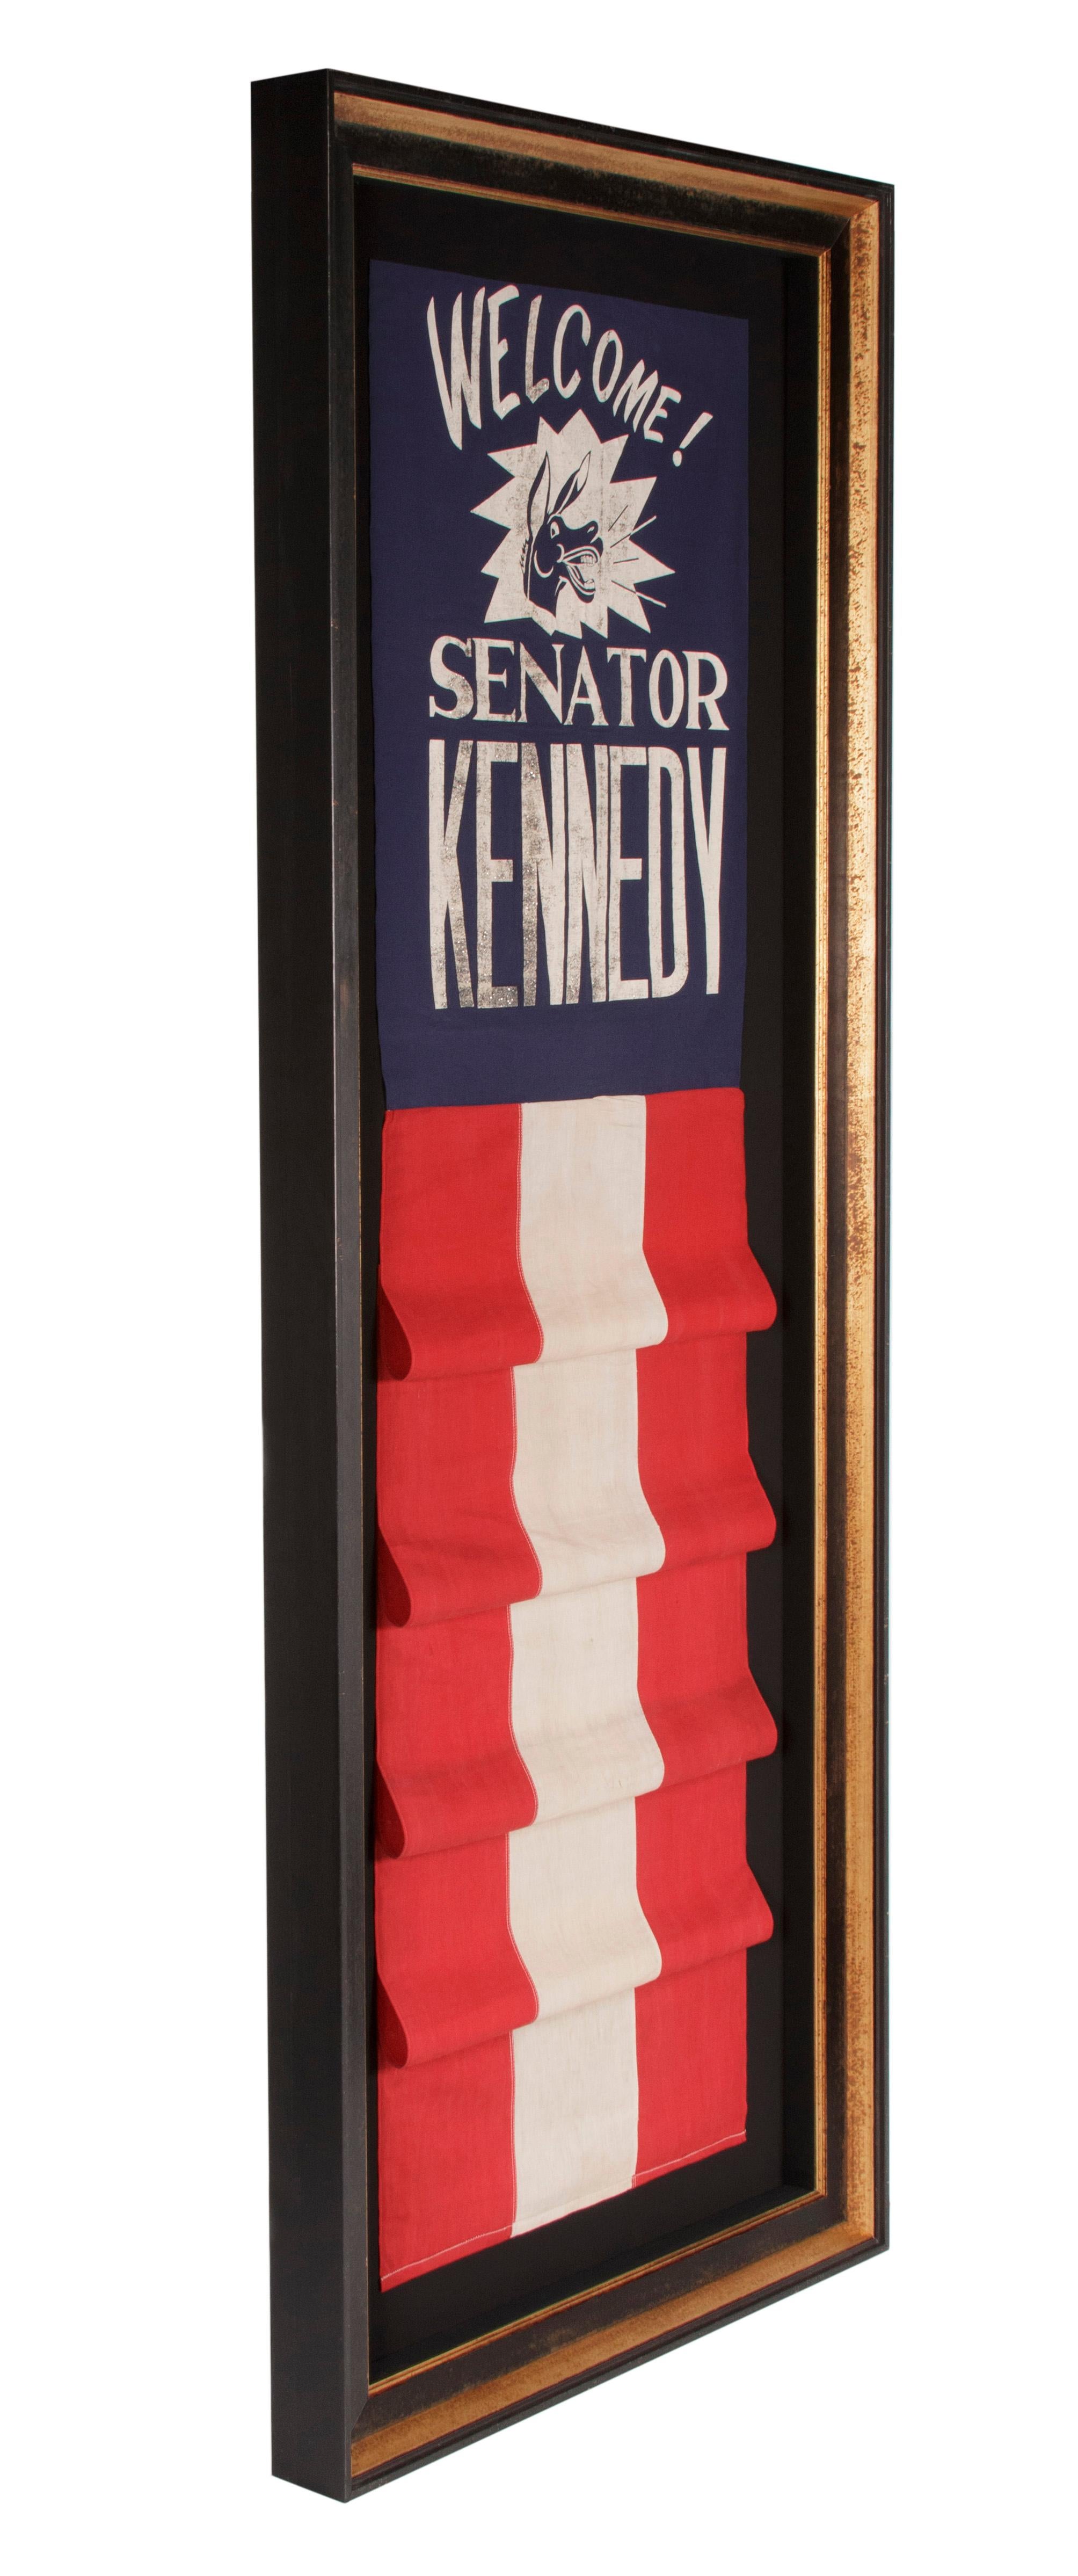 GRAPHIC BANNER WELCOMING JOHN F. KENNEDY AS SENATOR FROM MASSACHUSETTS, WITH NEIGHING DEMOCRAT DONKEY AND GLITTERED LETTERING, 1953-1960, SINGULAR AMONG KNOWN OBJECTS 

Gubernatorial, congressional, and senatorial items for men who became major U.S.